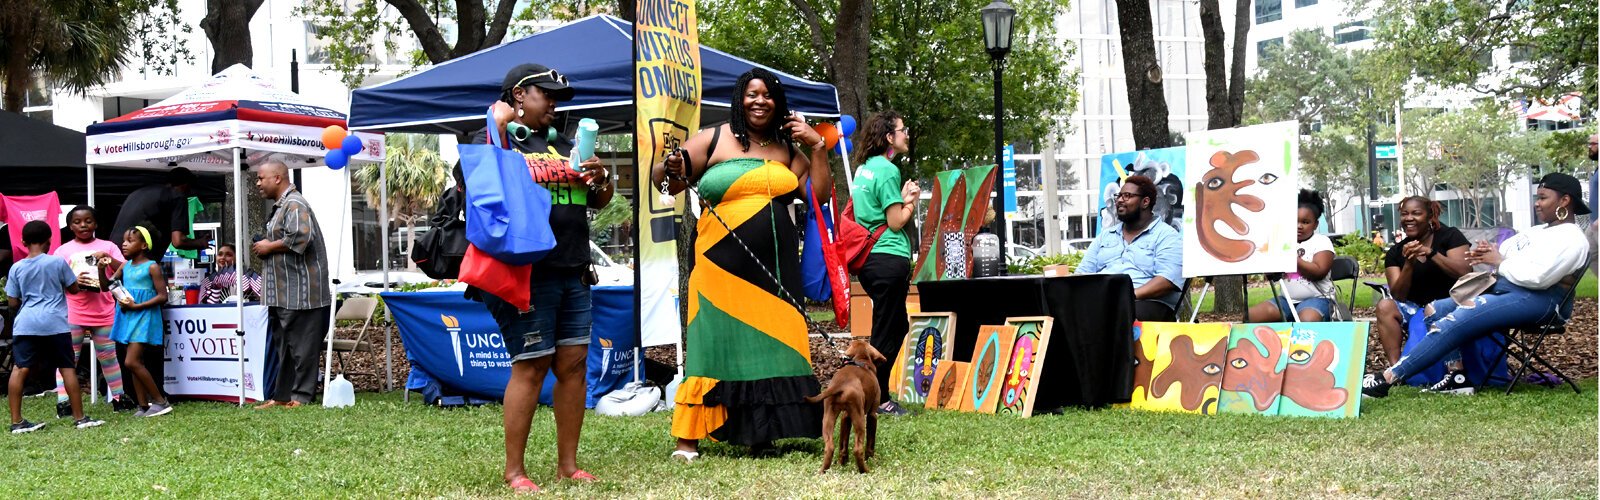 Event goers enjoy themselves at the Juneteenth festival, which included self-taught painter and digital artist Jaurice Moore and his Afro-futuristic art.